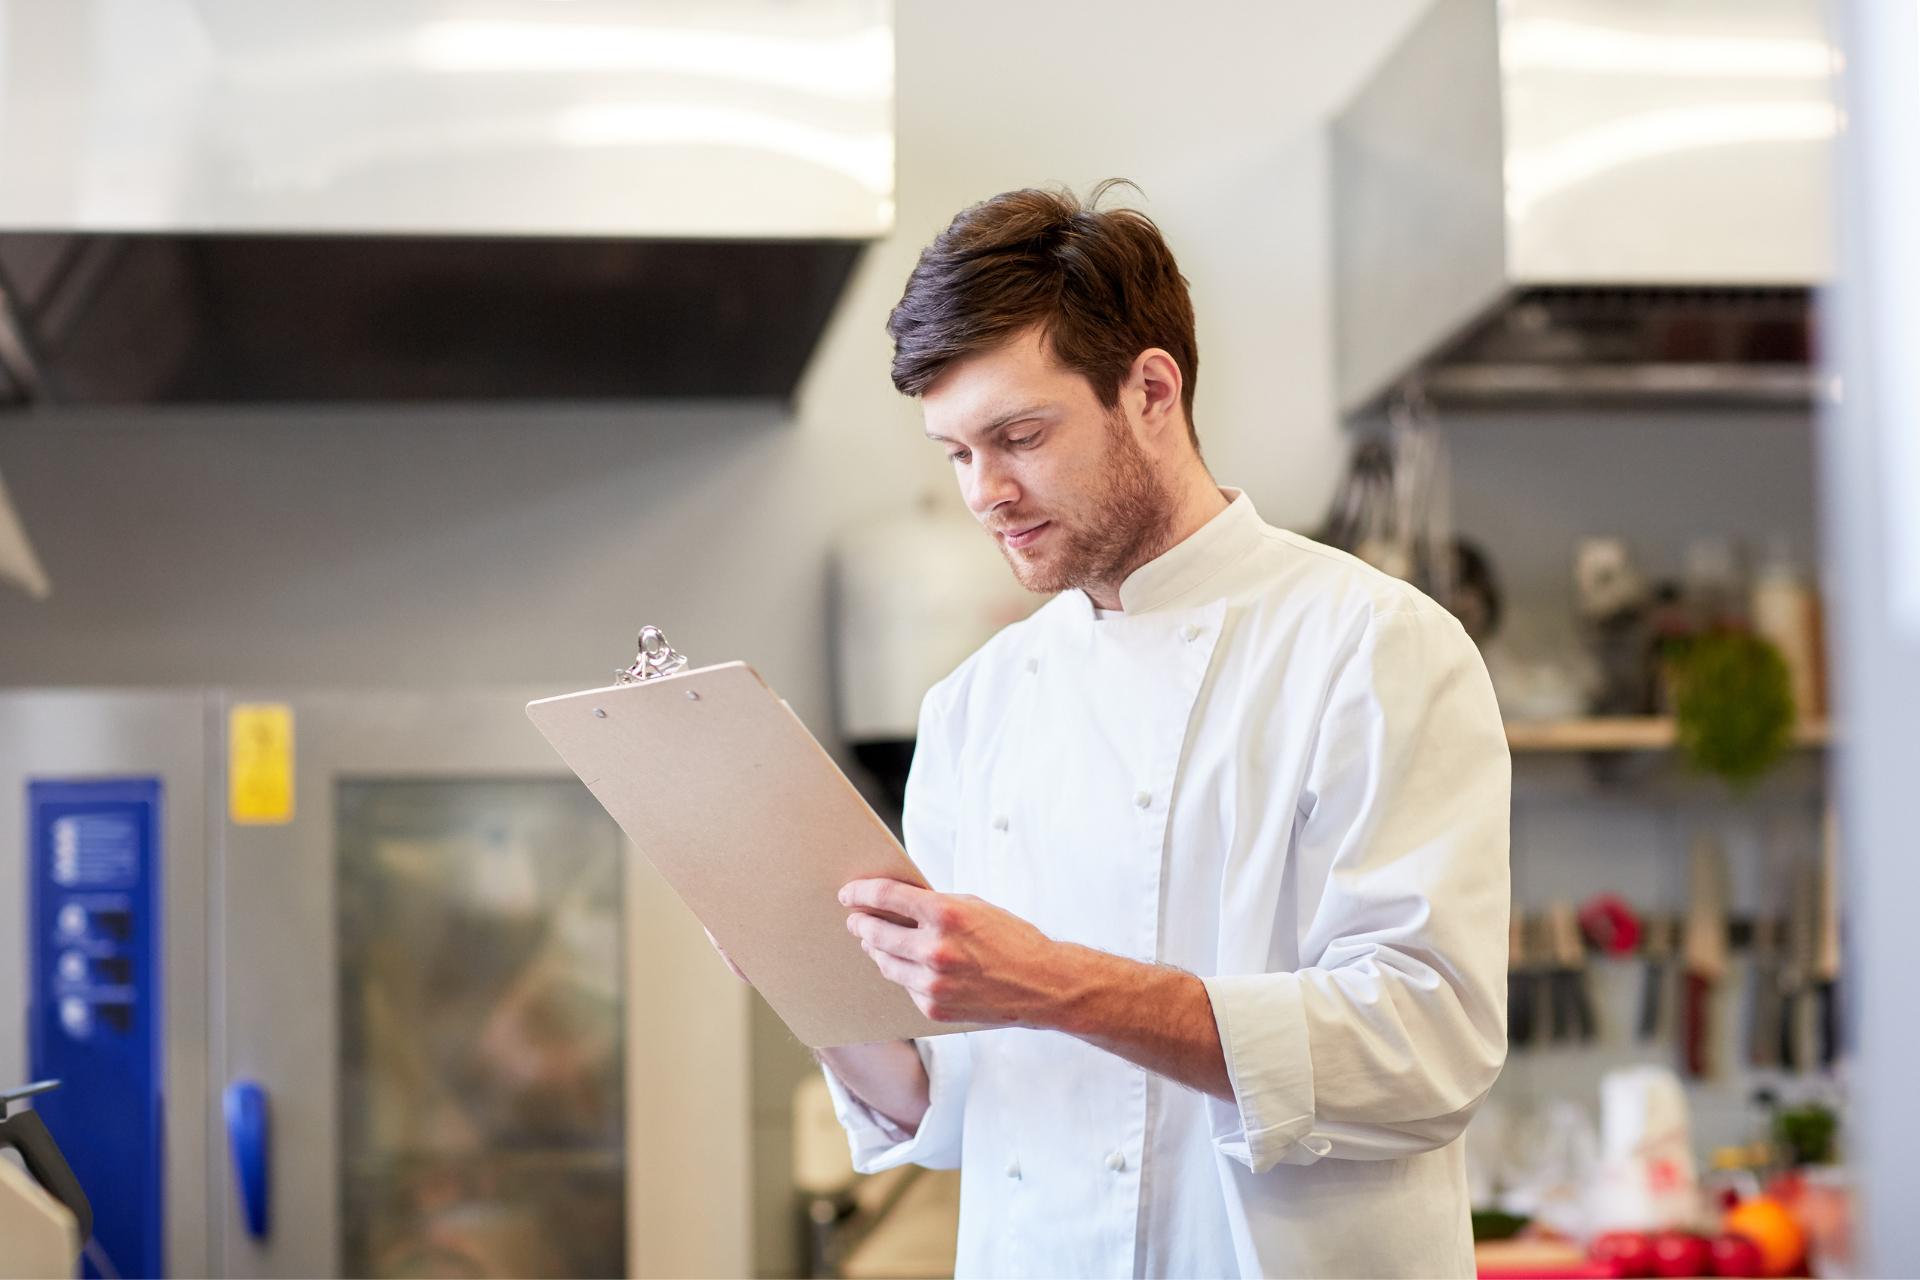 managing your restaurant's inventory is a thing of the past. Now, you can automate it easily using inventory management apps!